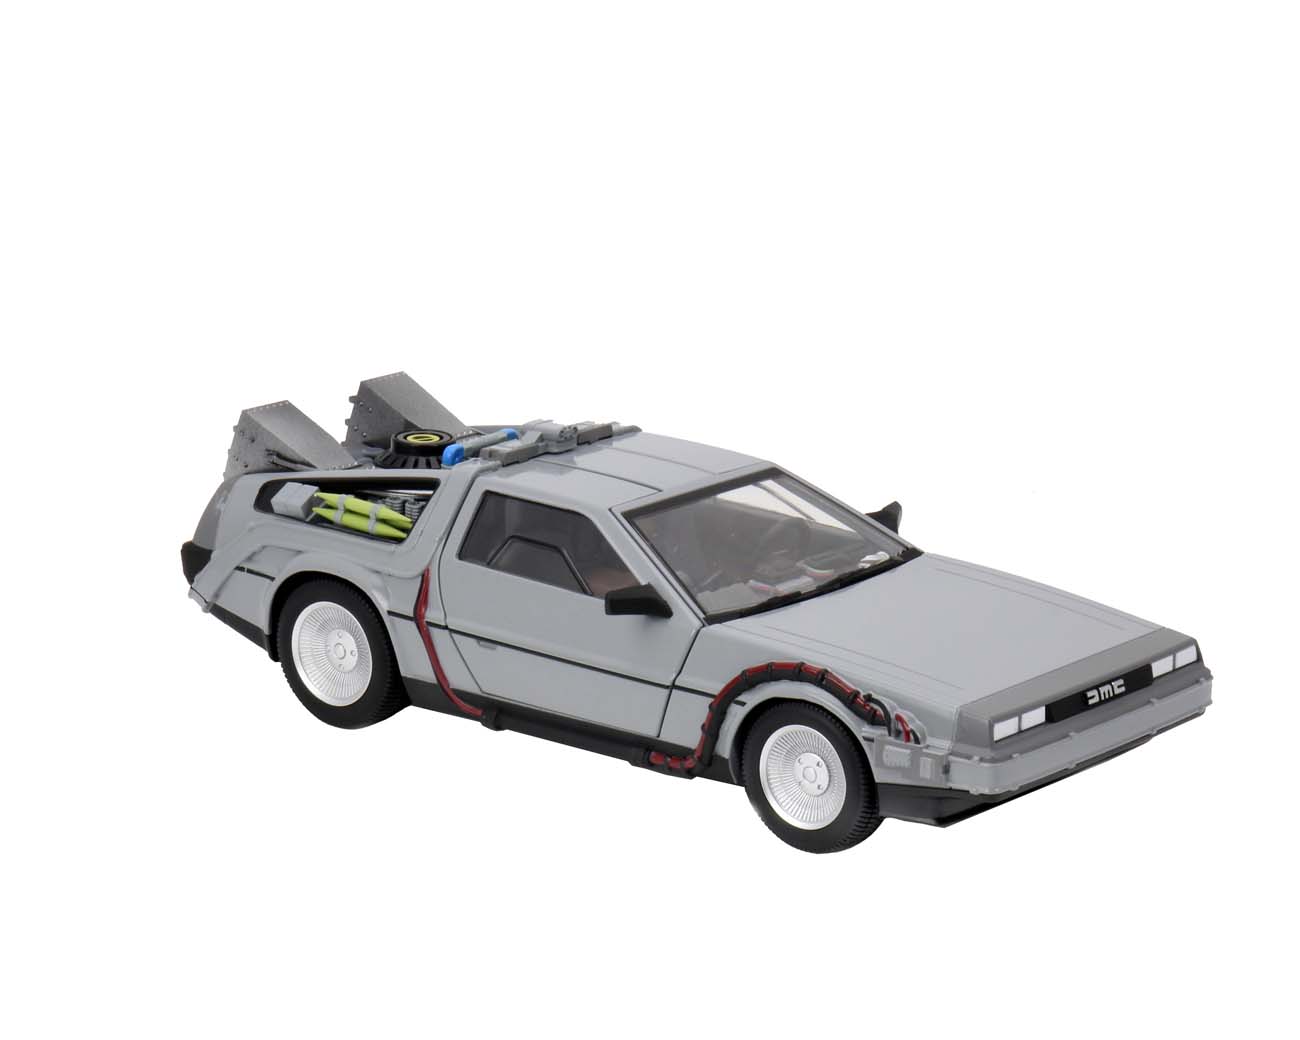 BACK TO THE FUTURE DIE-CAST VEHICLE TIME MACHINE NECA 2020